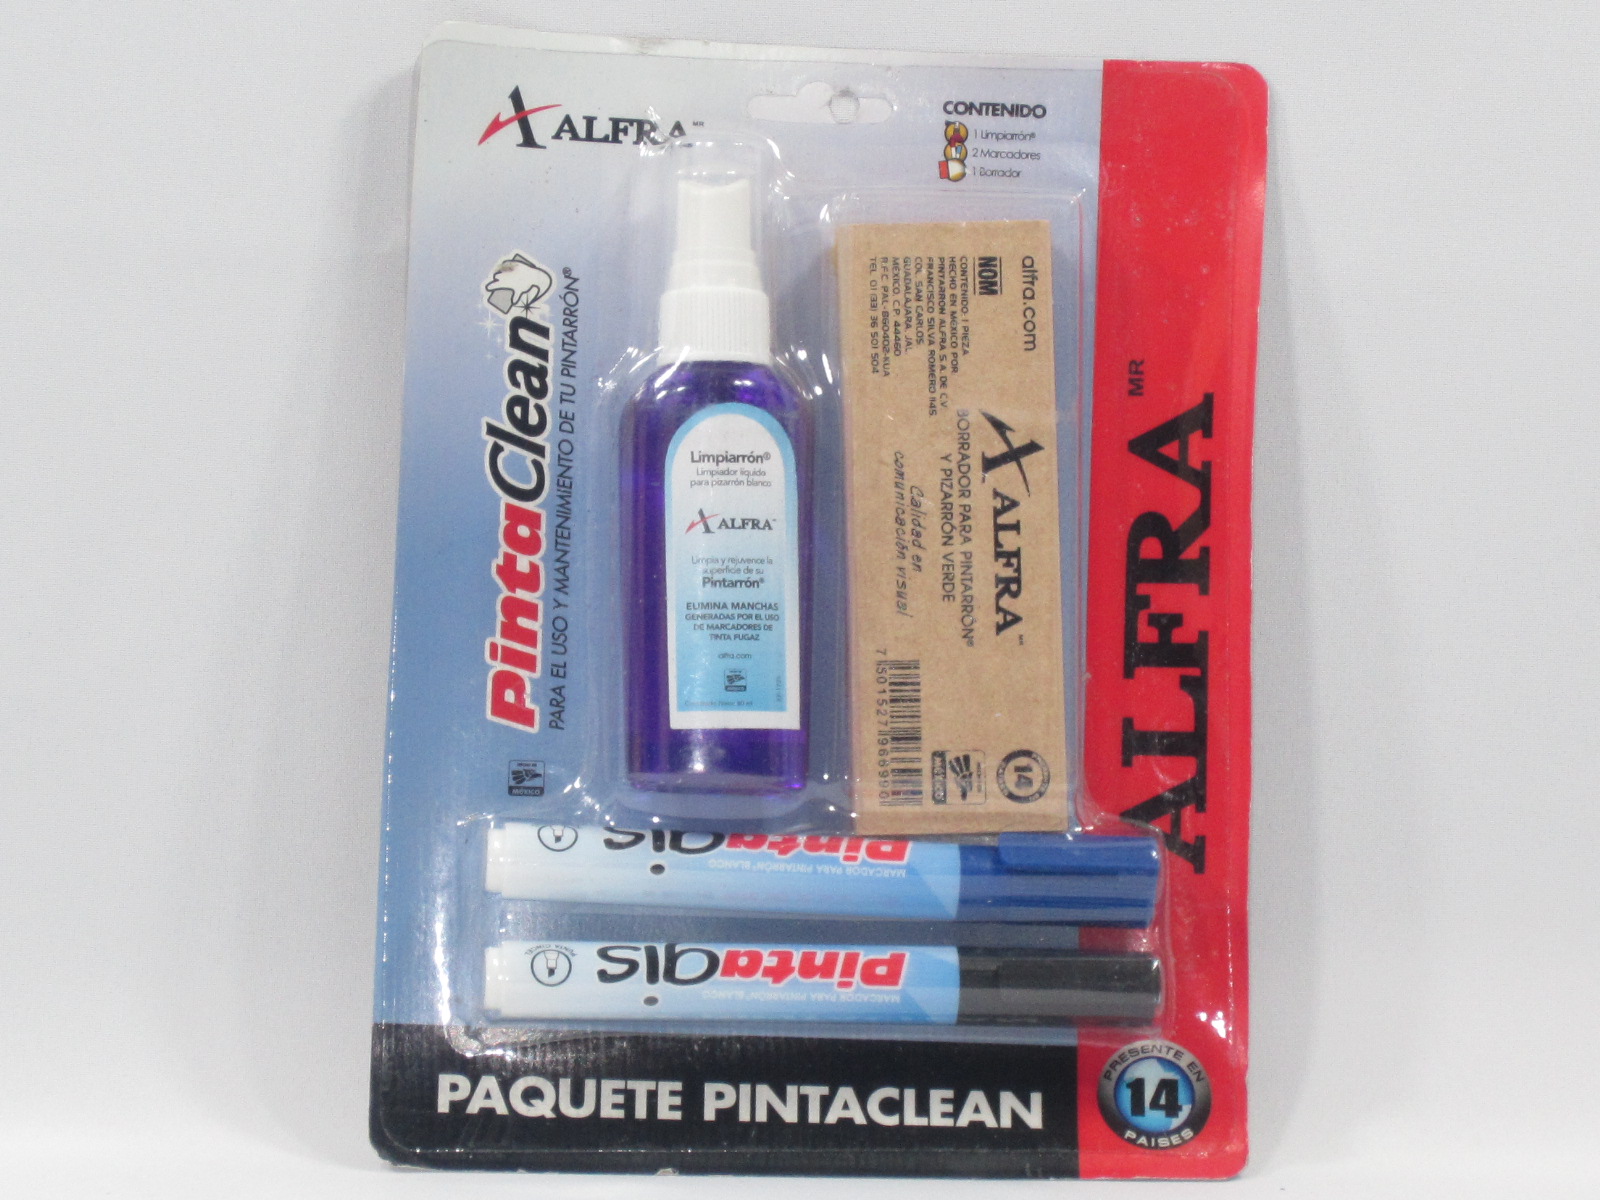 PAQUETE BLISTER PINTA-CLEAN 6617 ALFRA                      